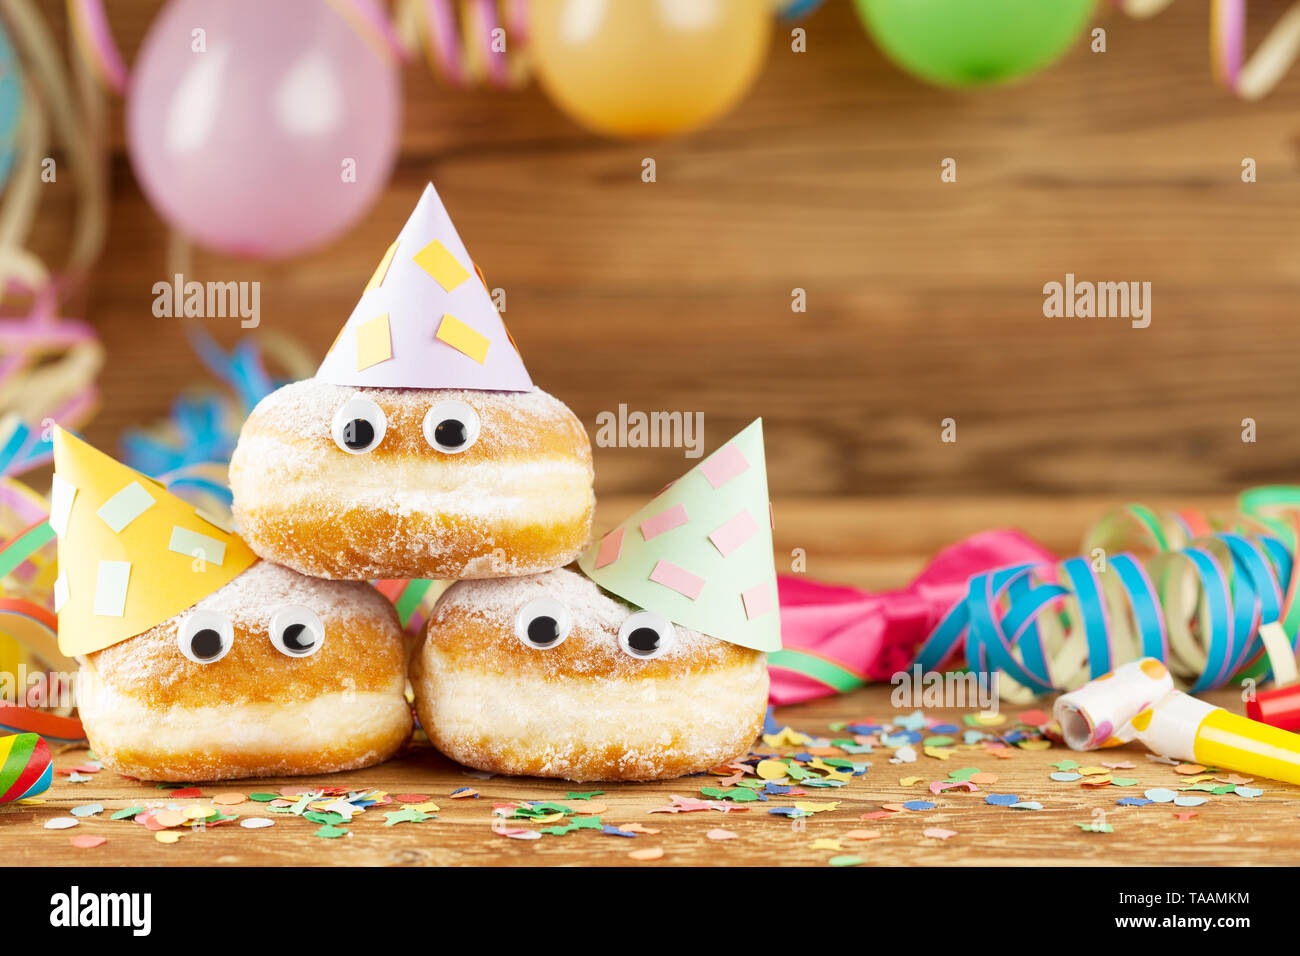 Carnival background with party decoration and cake Stock Photo